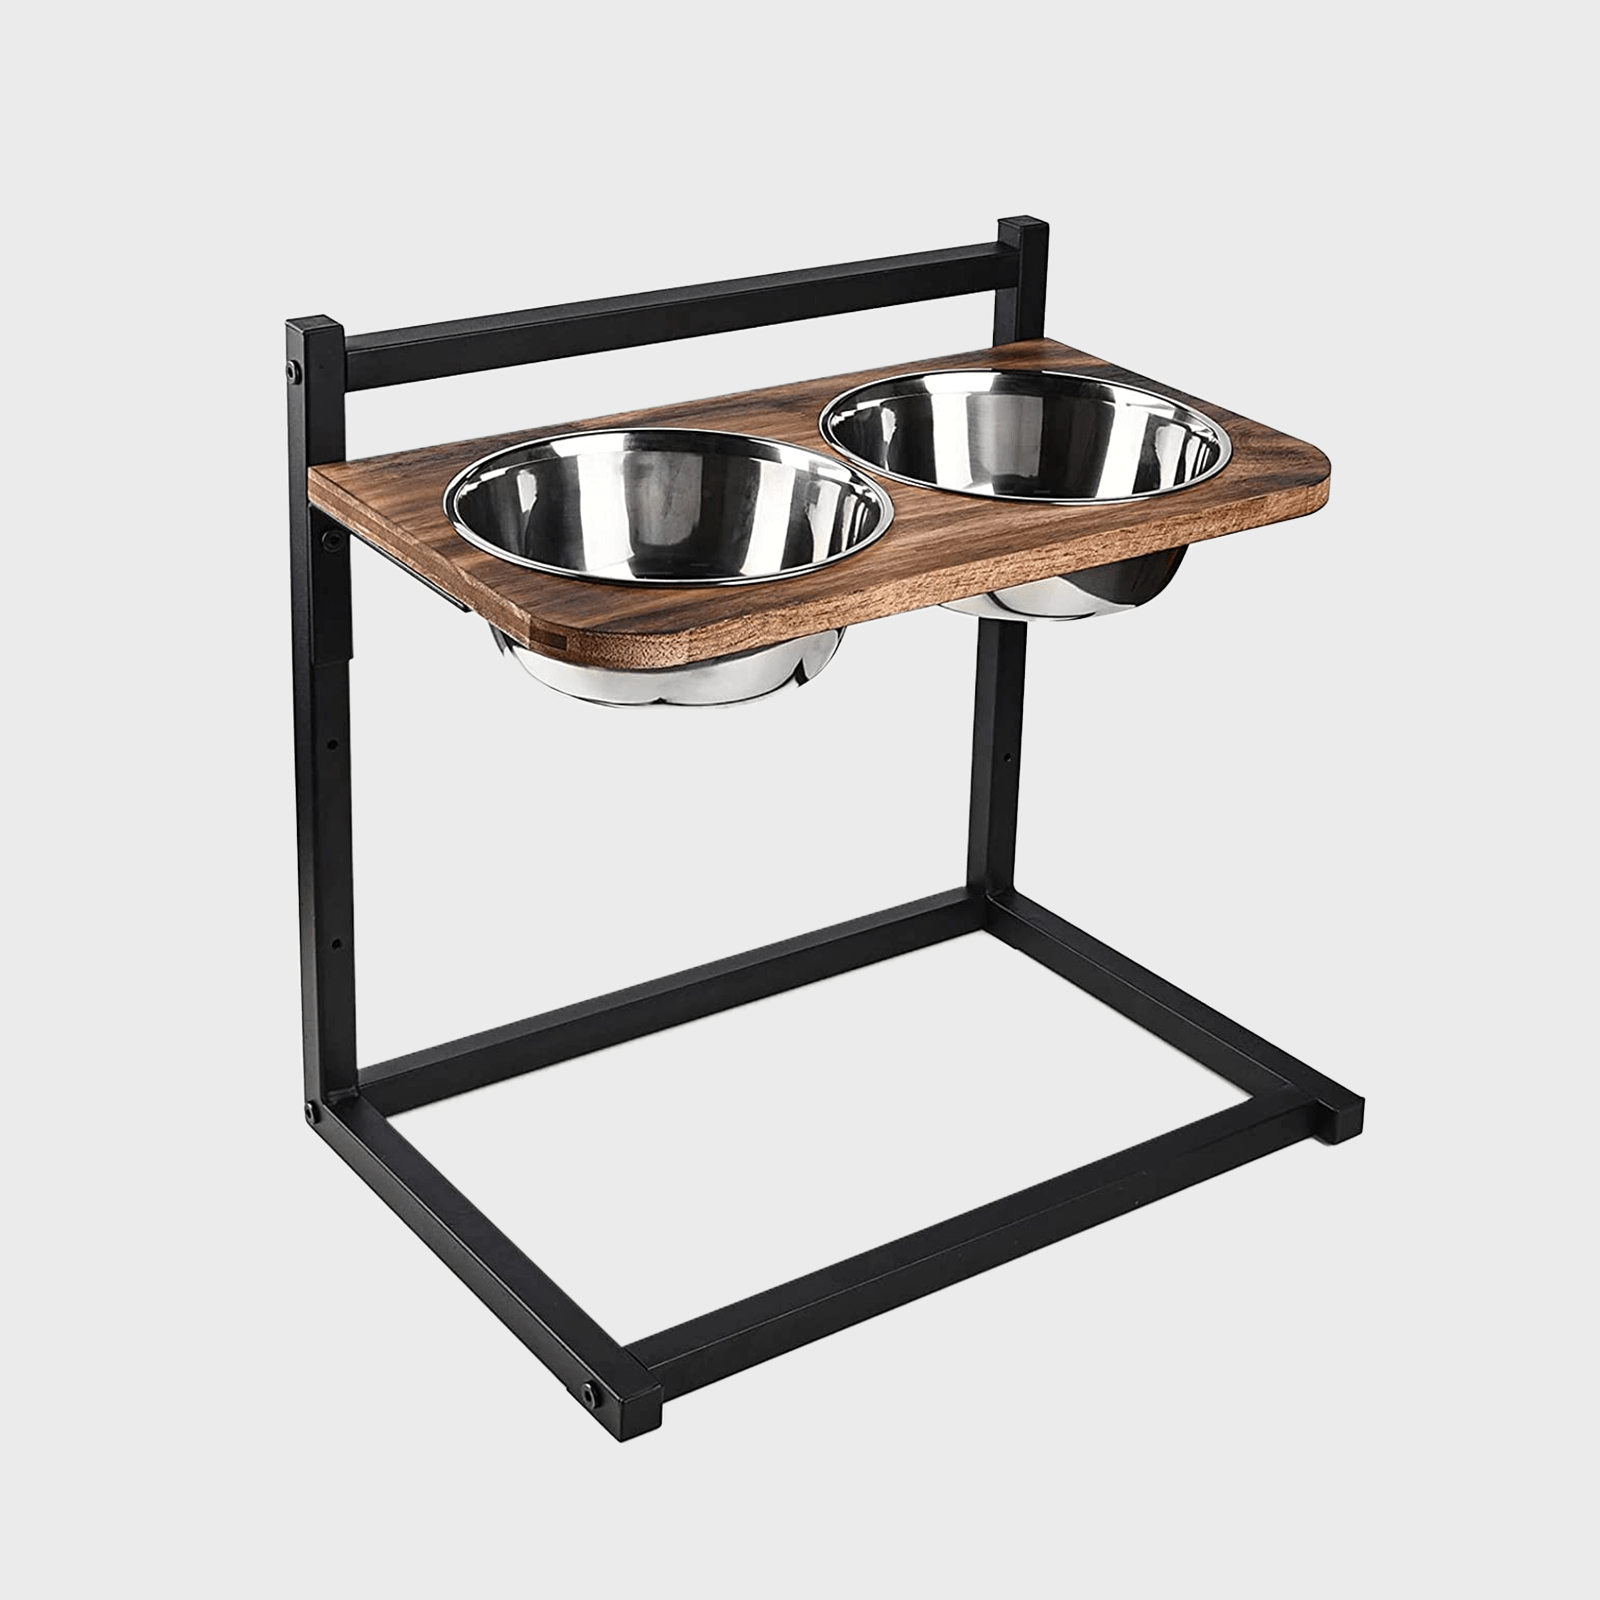 Siooko Elevated Dog Bowls for Large Dogs Medium Small Sized Dog , Wood Raised  Dog Bowl Stand with 2 Stainless Steel Dog Bowls, Dog Food Bowl and Dog  Water Bowl Non-Slip Feet (